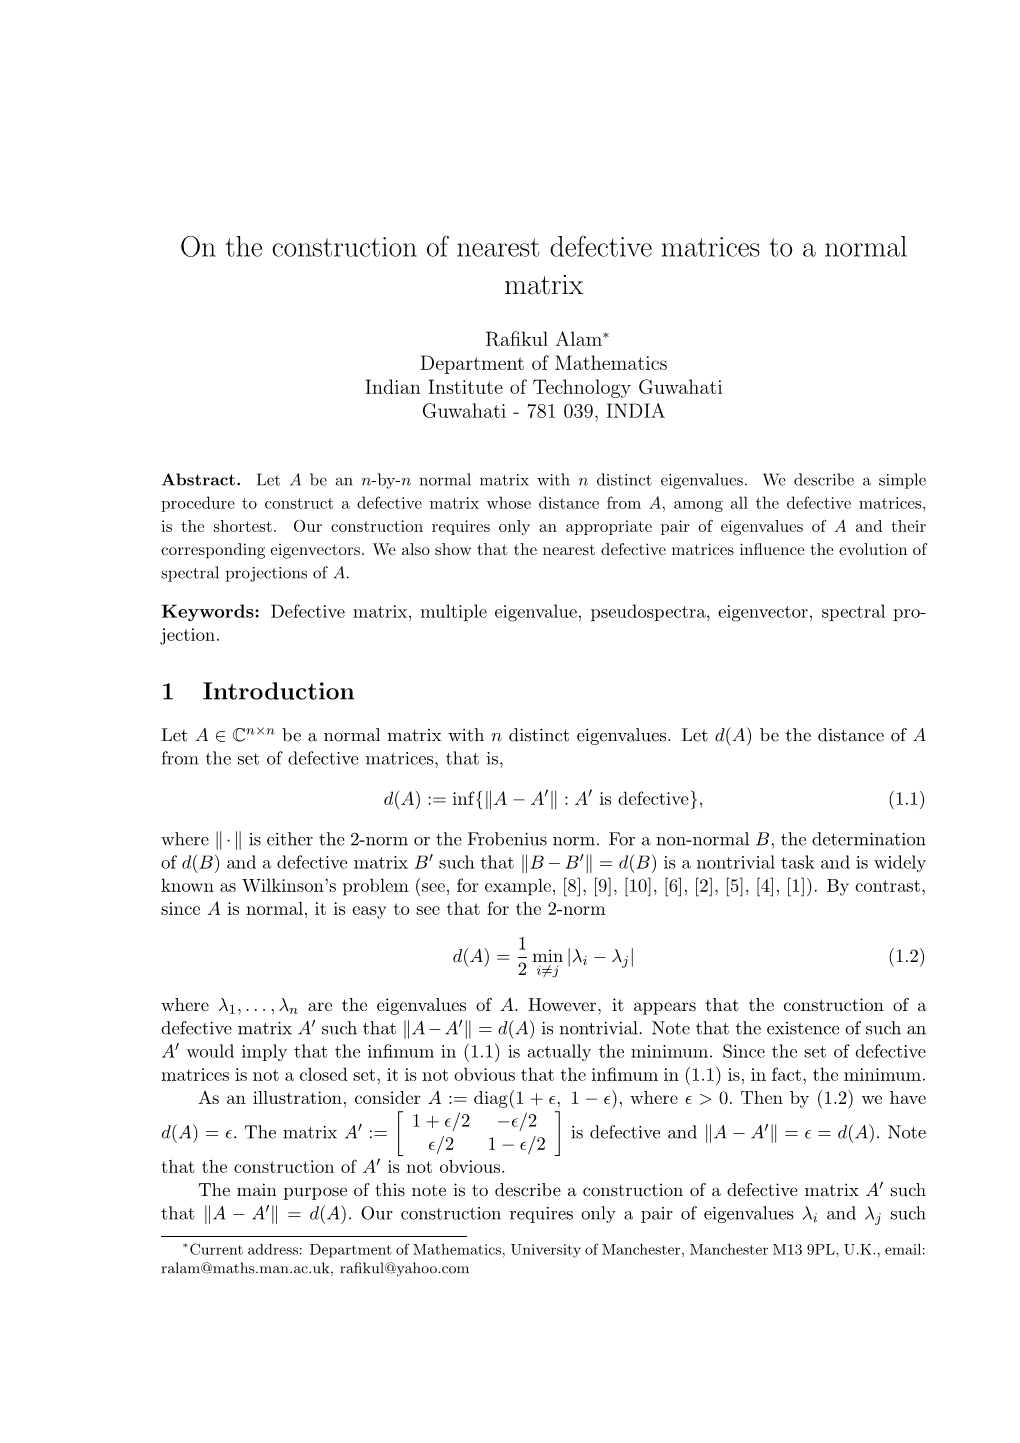 On the Construction of Nearest Defective Matrices to a Normal Matrix